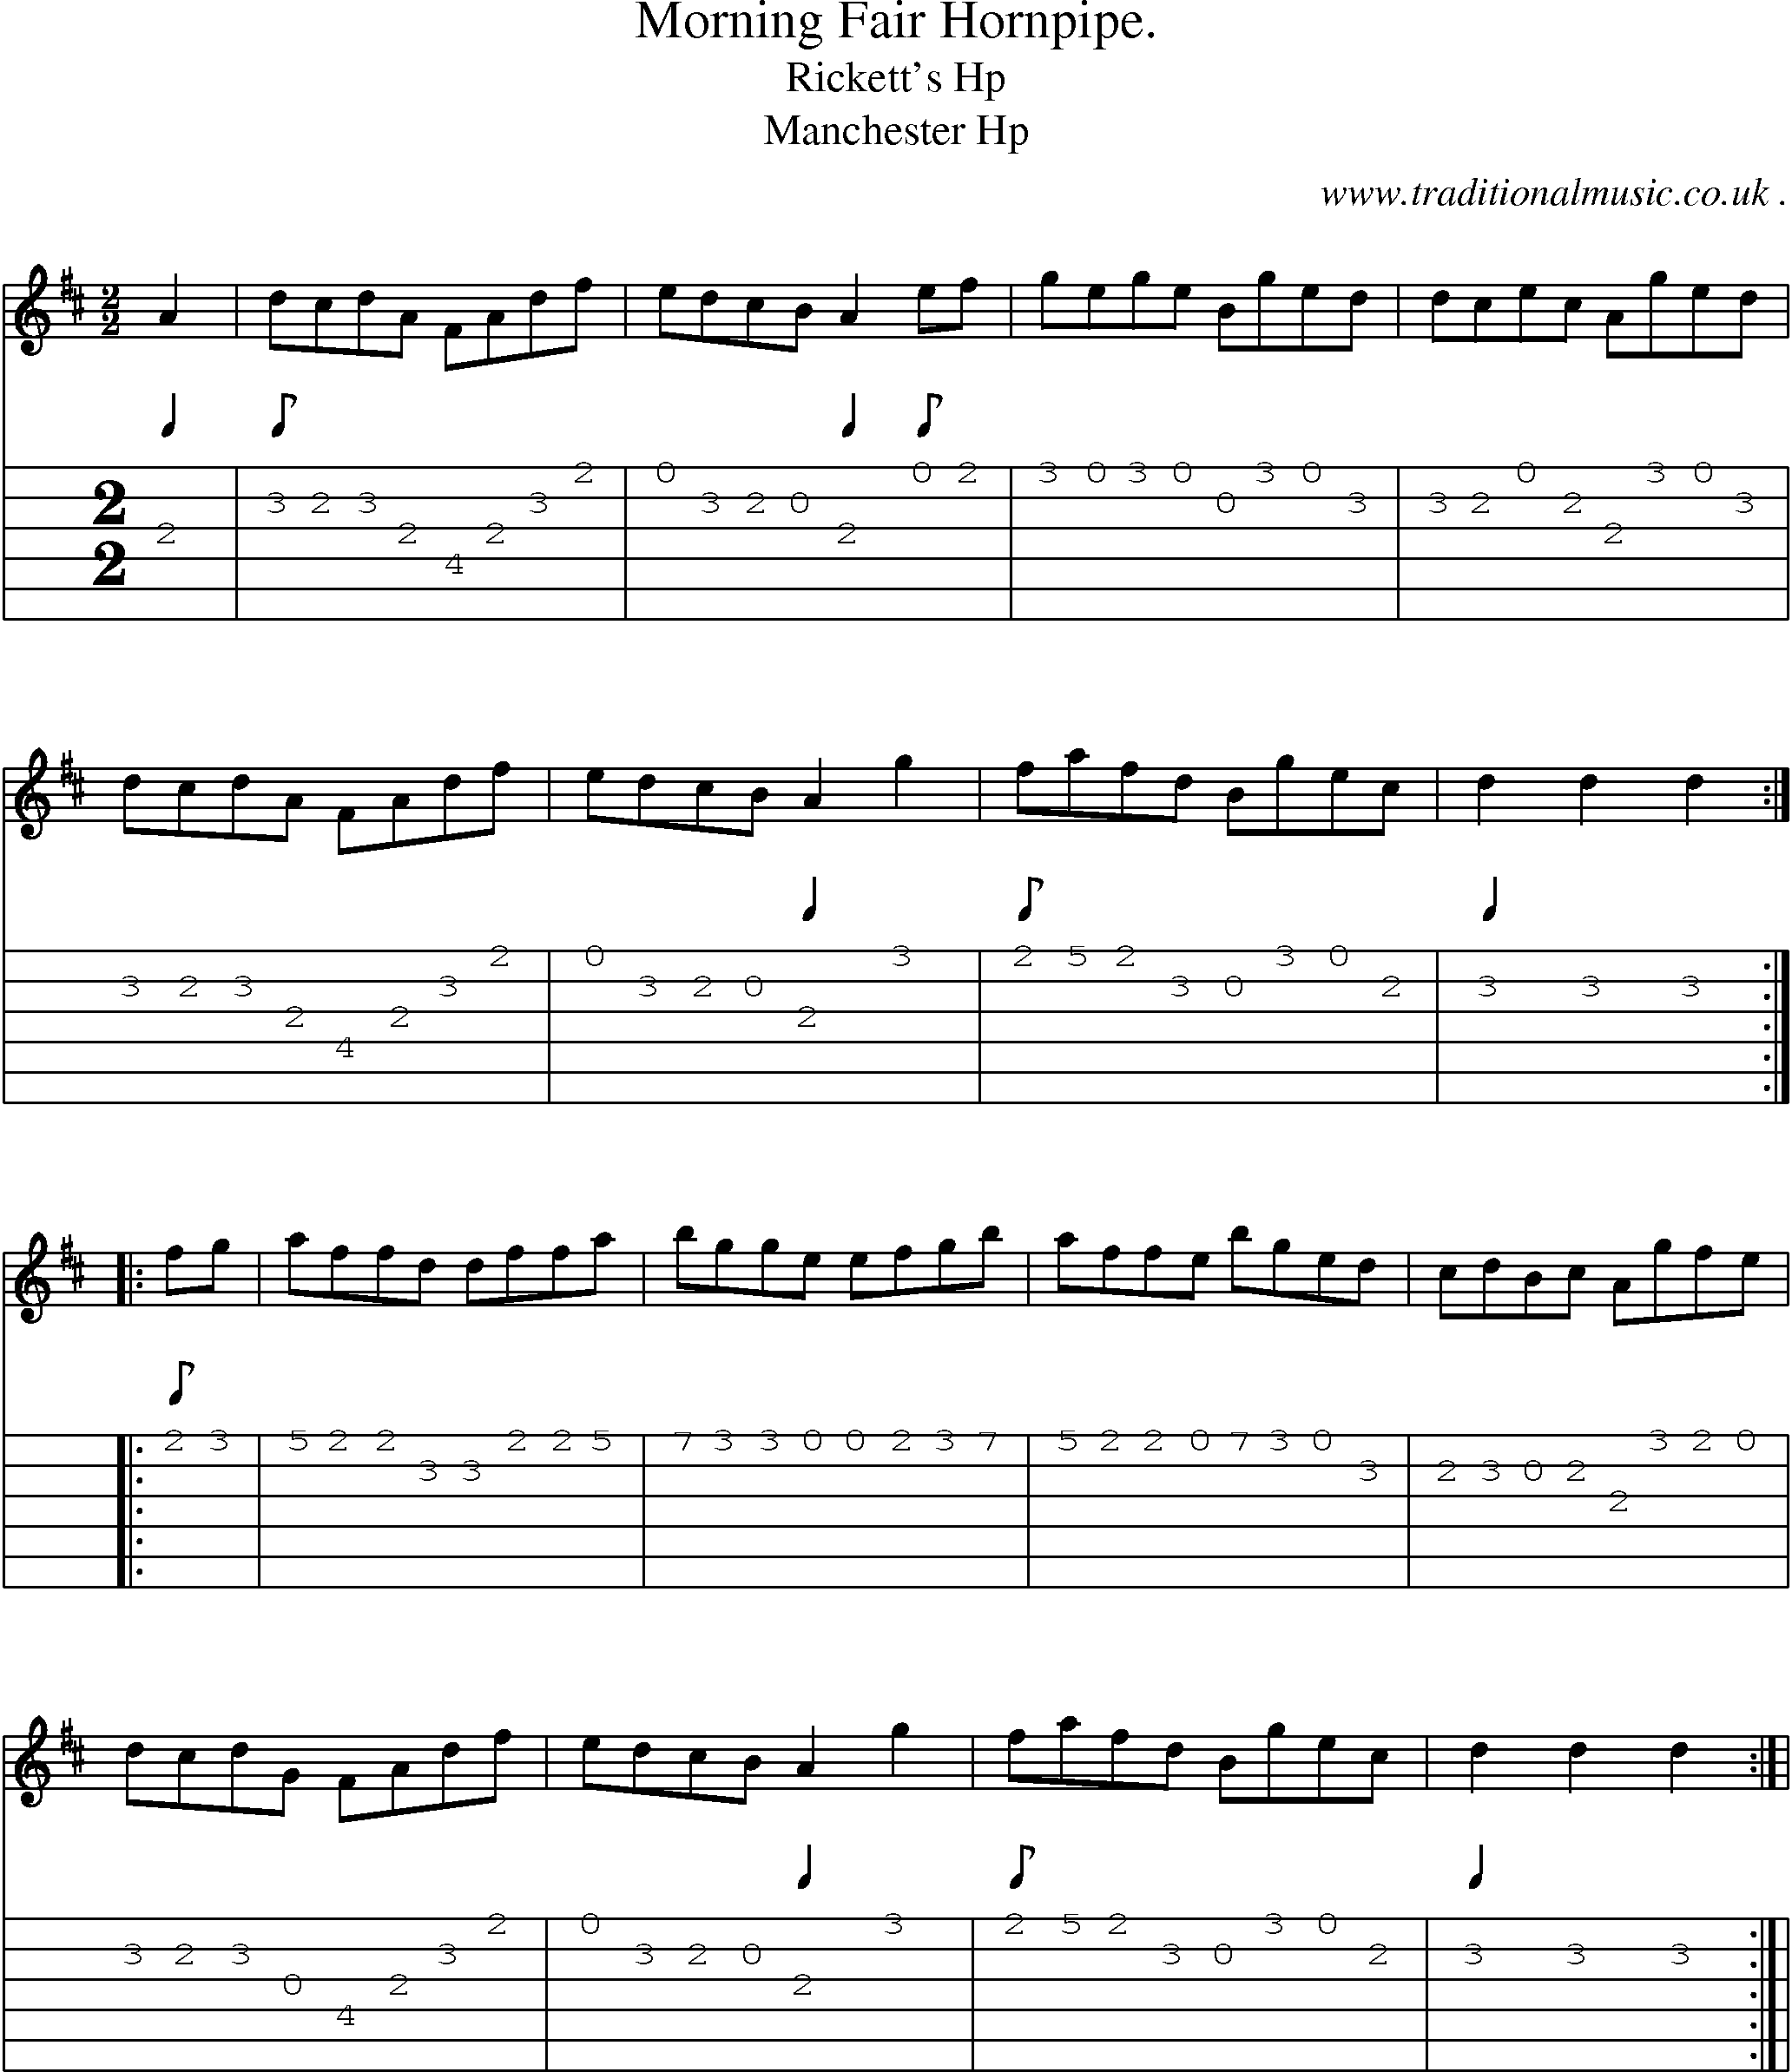 Sheet-Music and Guitar Tabs for Morning Fair Hornpipe